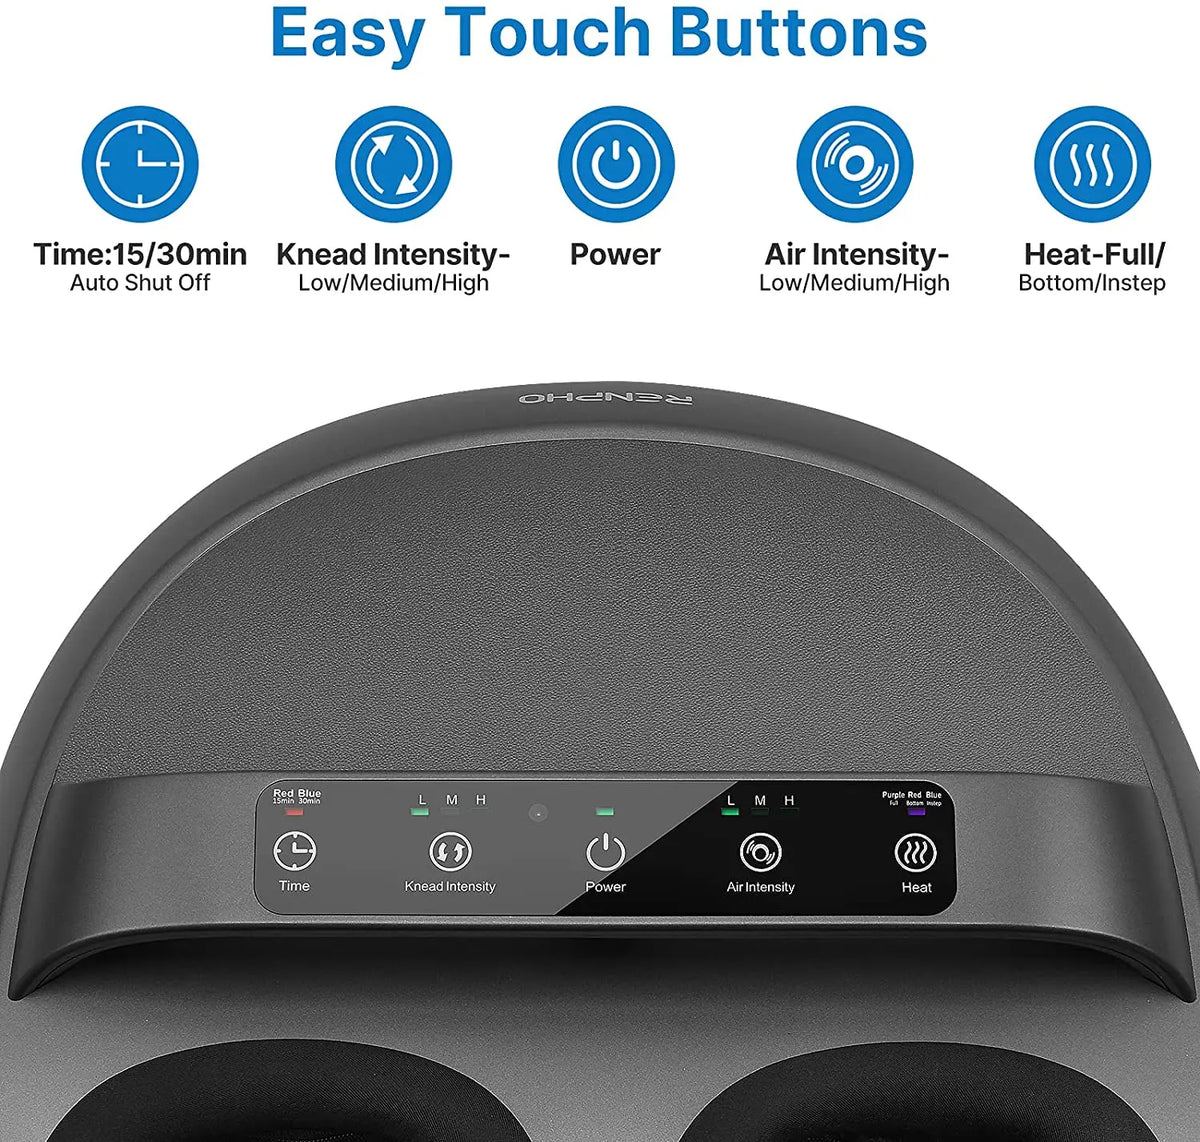 Image of a Renpho EU Shiatsu Foot Massager with Handle control panel. The panel features easy touch buttons for time settings (15/30 minutes with auto shut-off), knead intensity (low/medium/high), power, air intensity (low/medium/high), and heat settings (full, bottom/instep). Enjoy shiatsu kneading and a soothing foot massage.